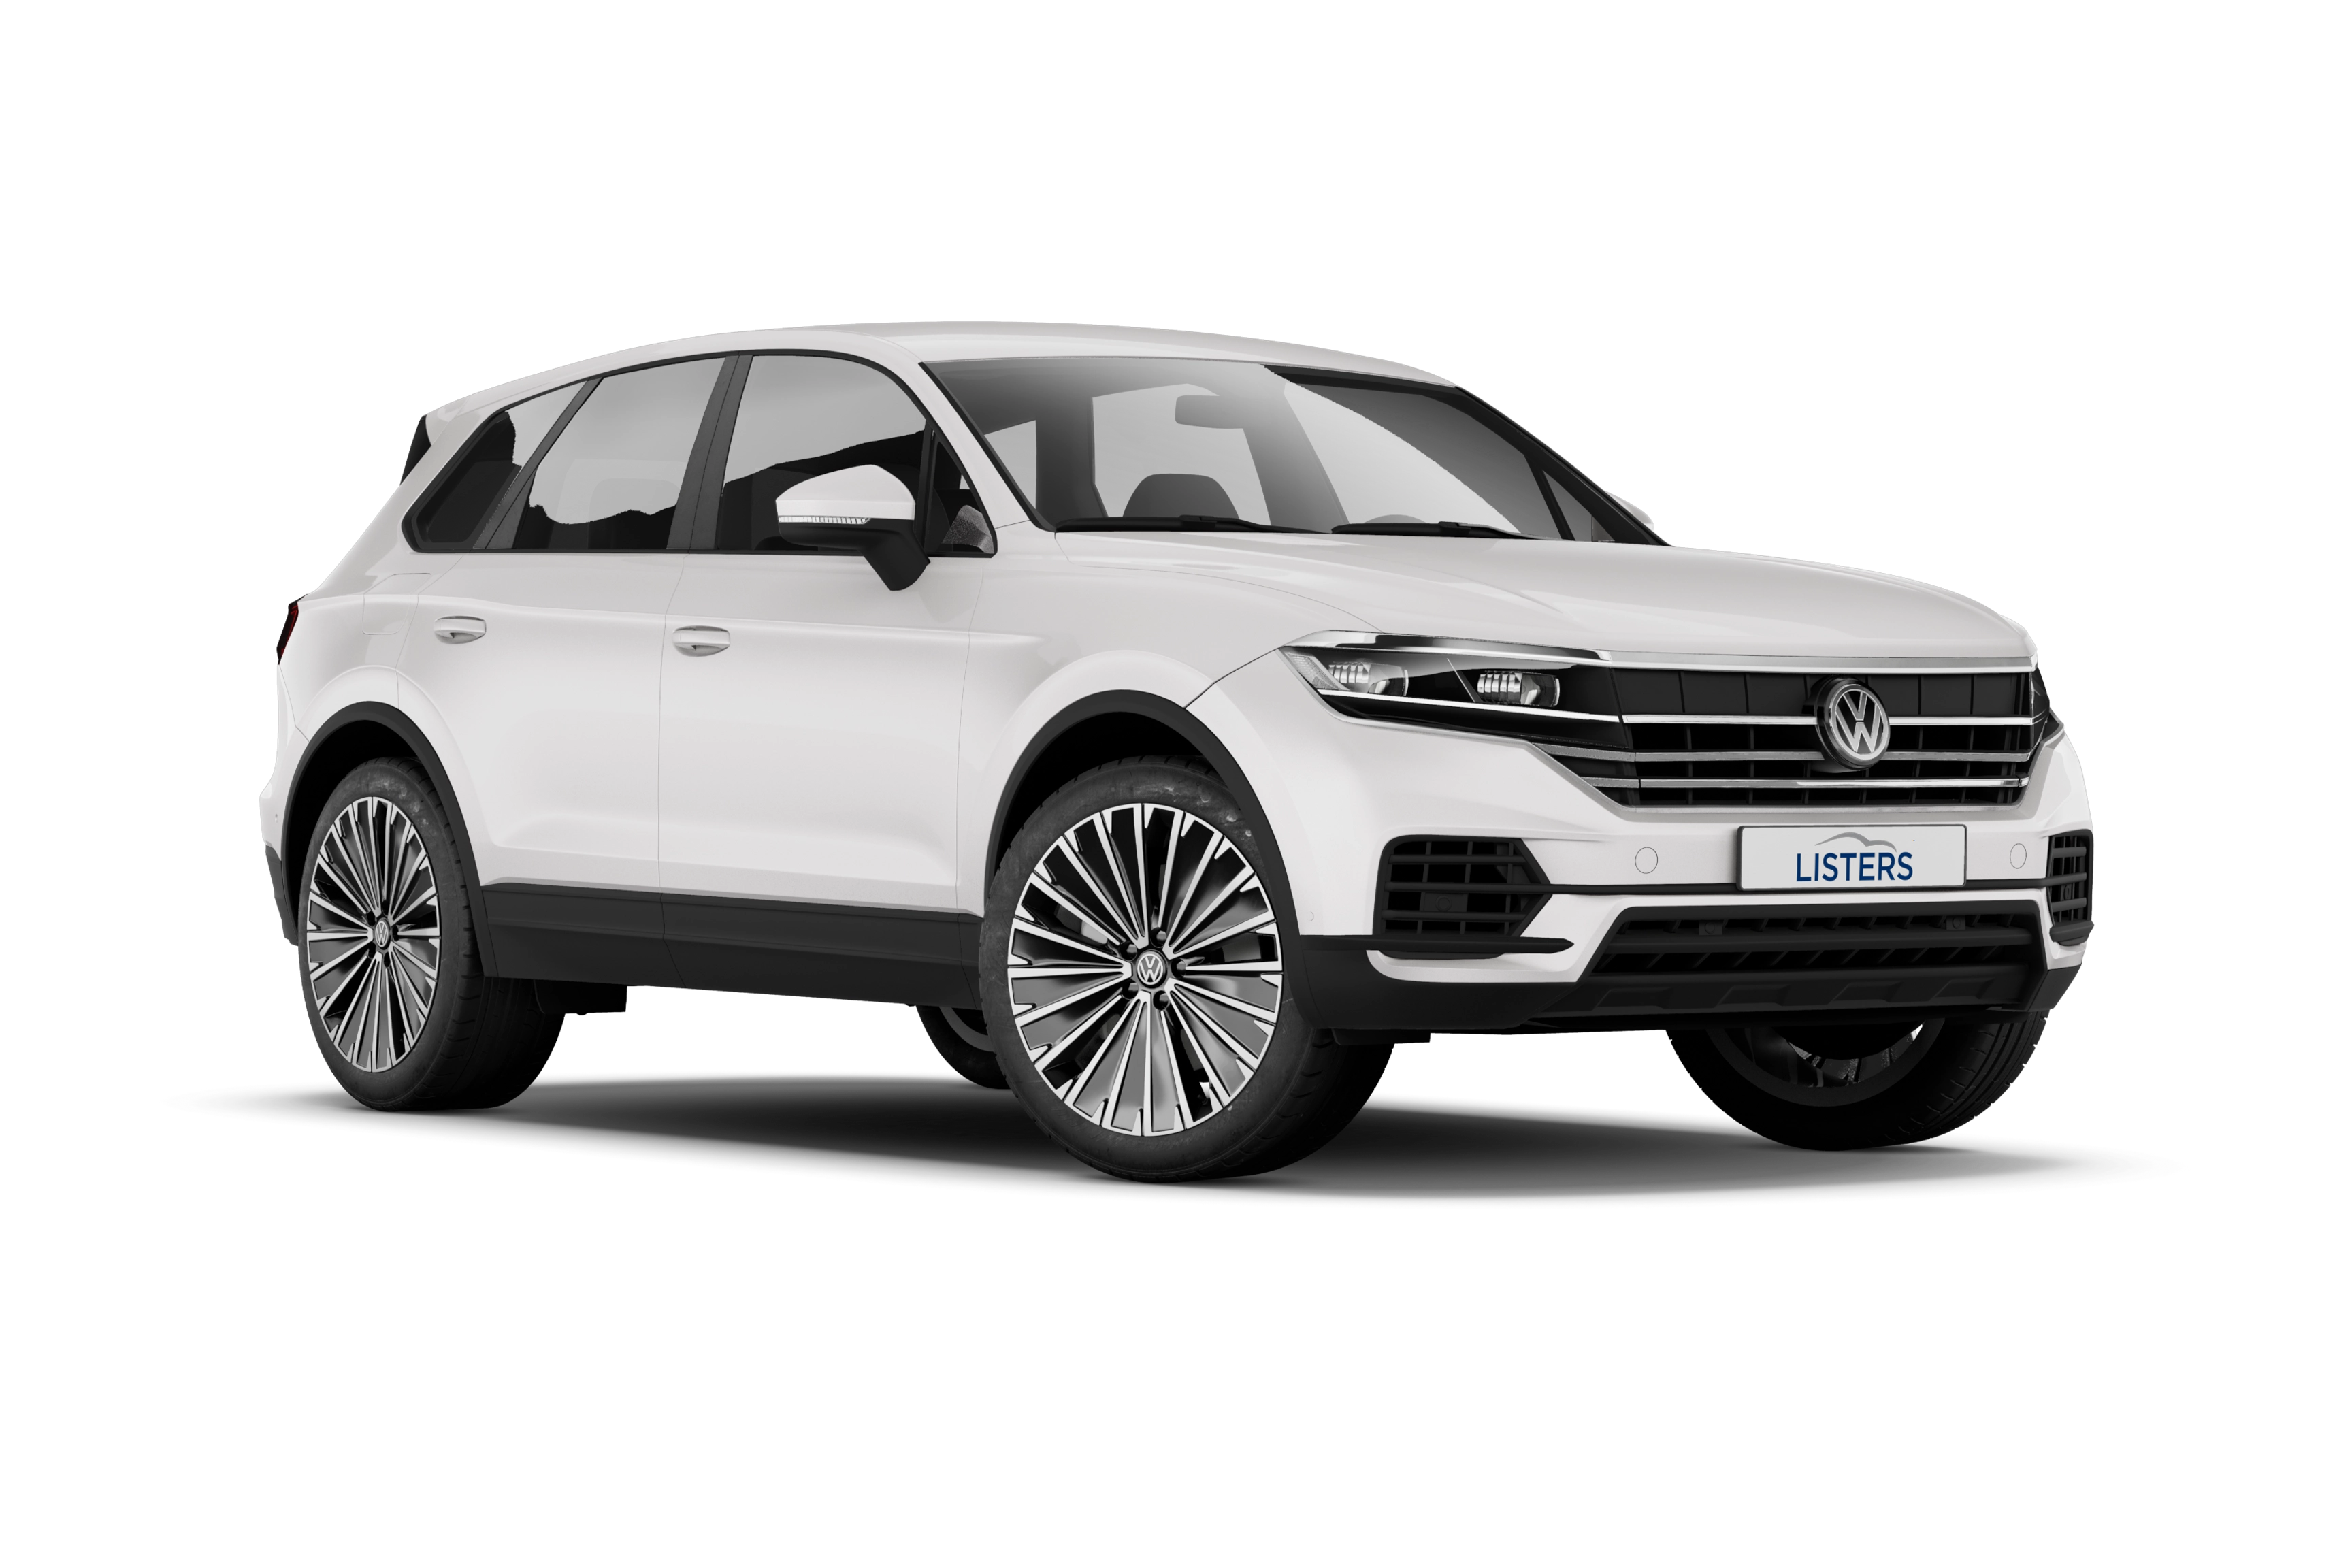 Volkswagen Touareg Contract Hire & Leasing Offers